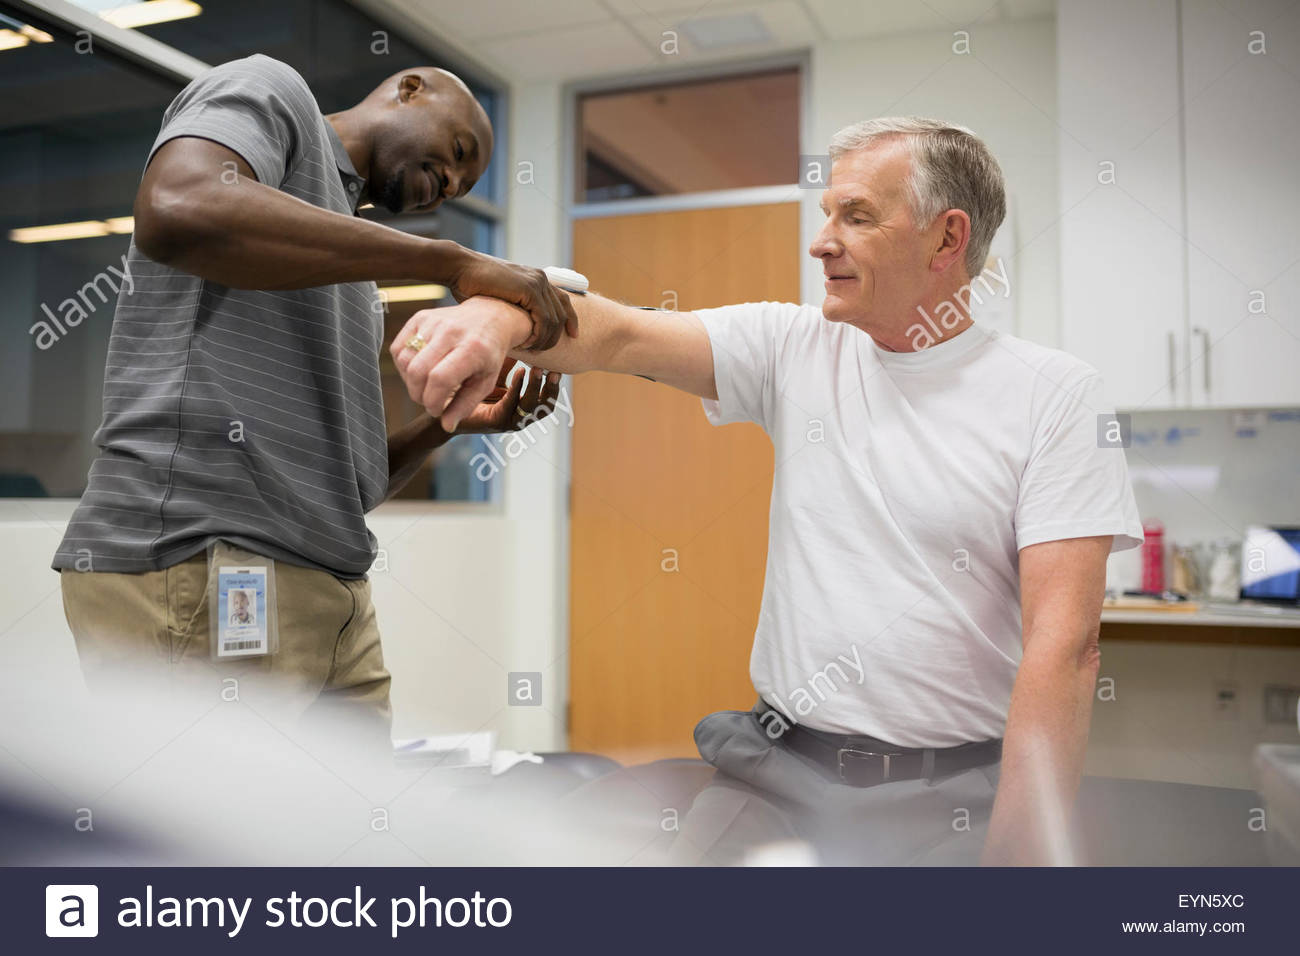 Physical therapist using electrodes on patient arm Stock Photo